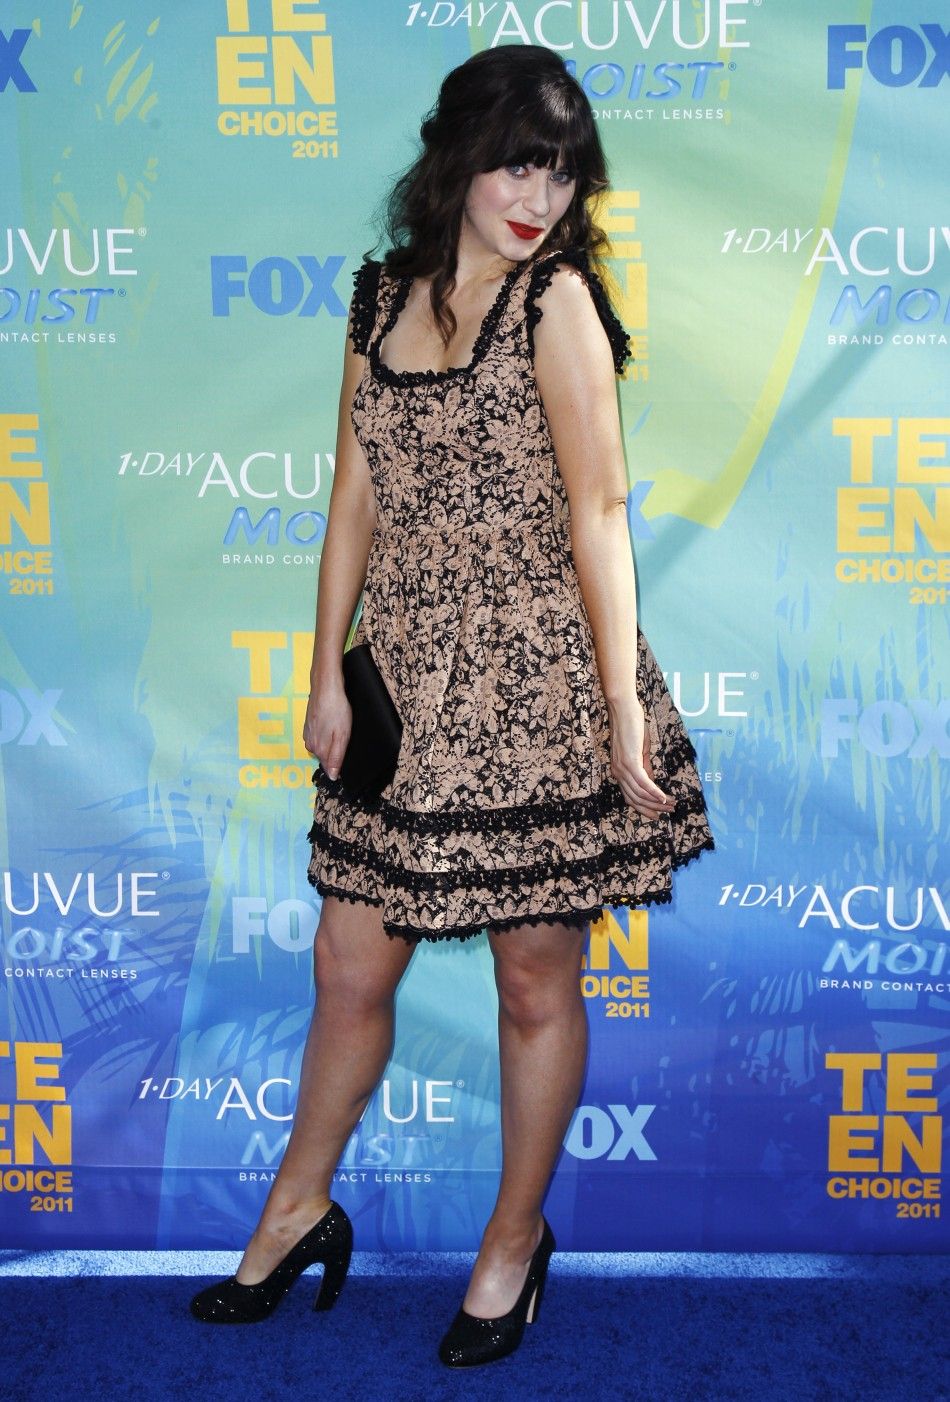 Worst-Dressed Celebs at the 2011 Teen Choice Awards